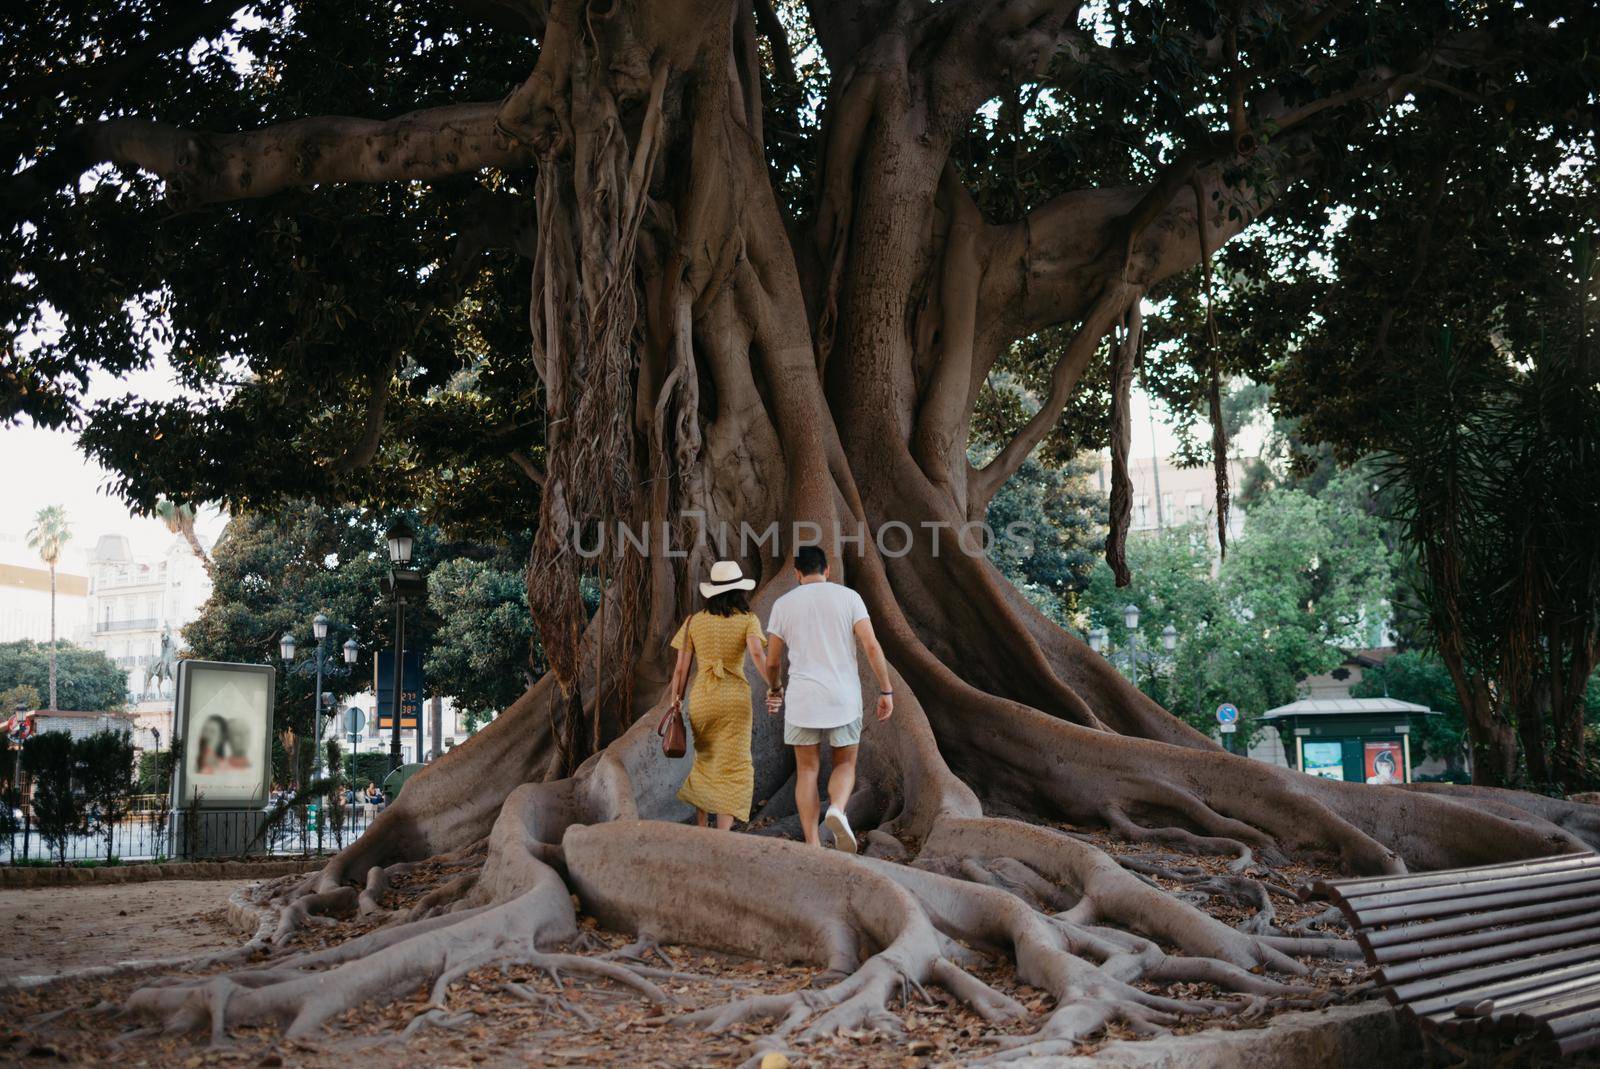 Woman with her boyfriend go to an old Valencian Ficus Macrophylla tree in Spain by RomanJRoyce